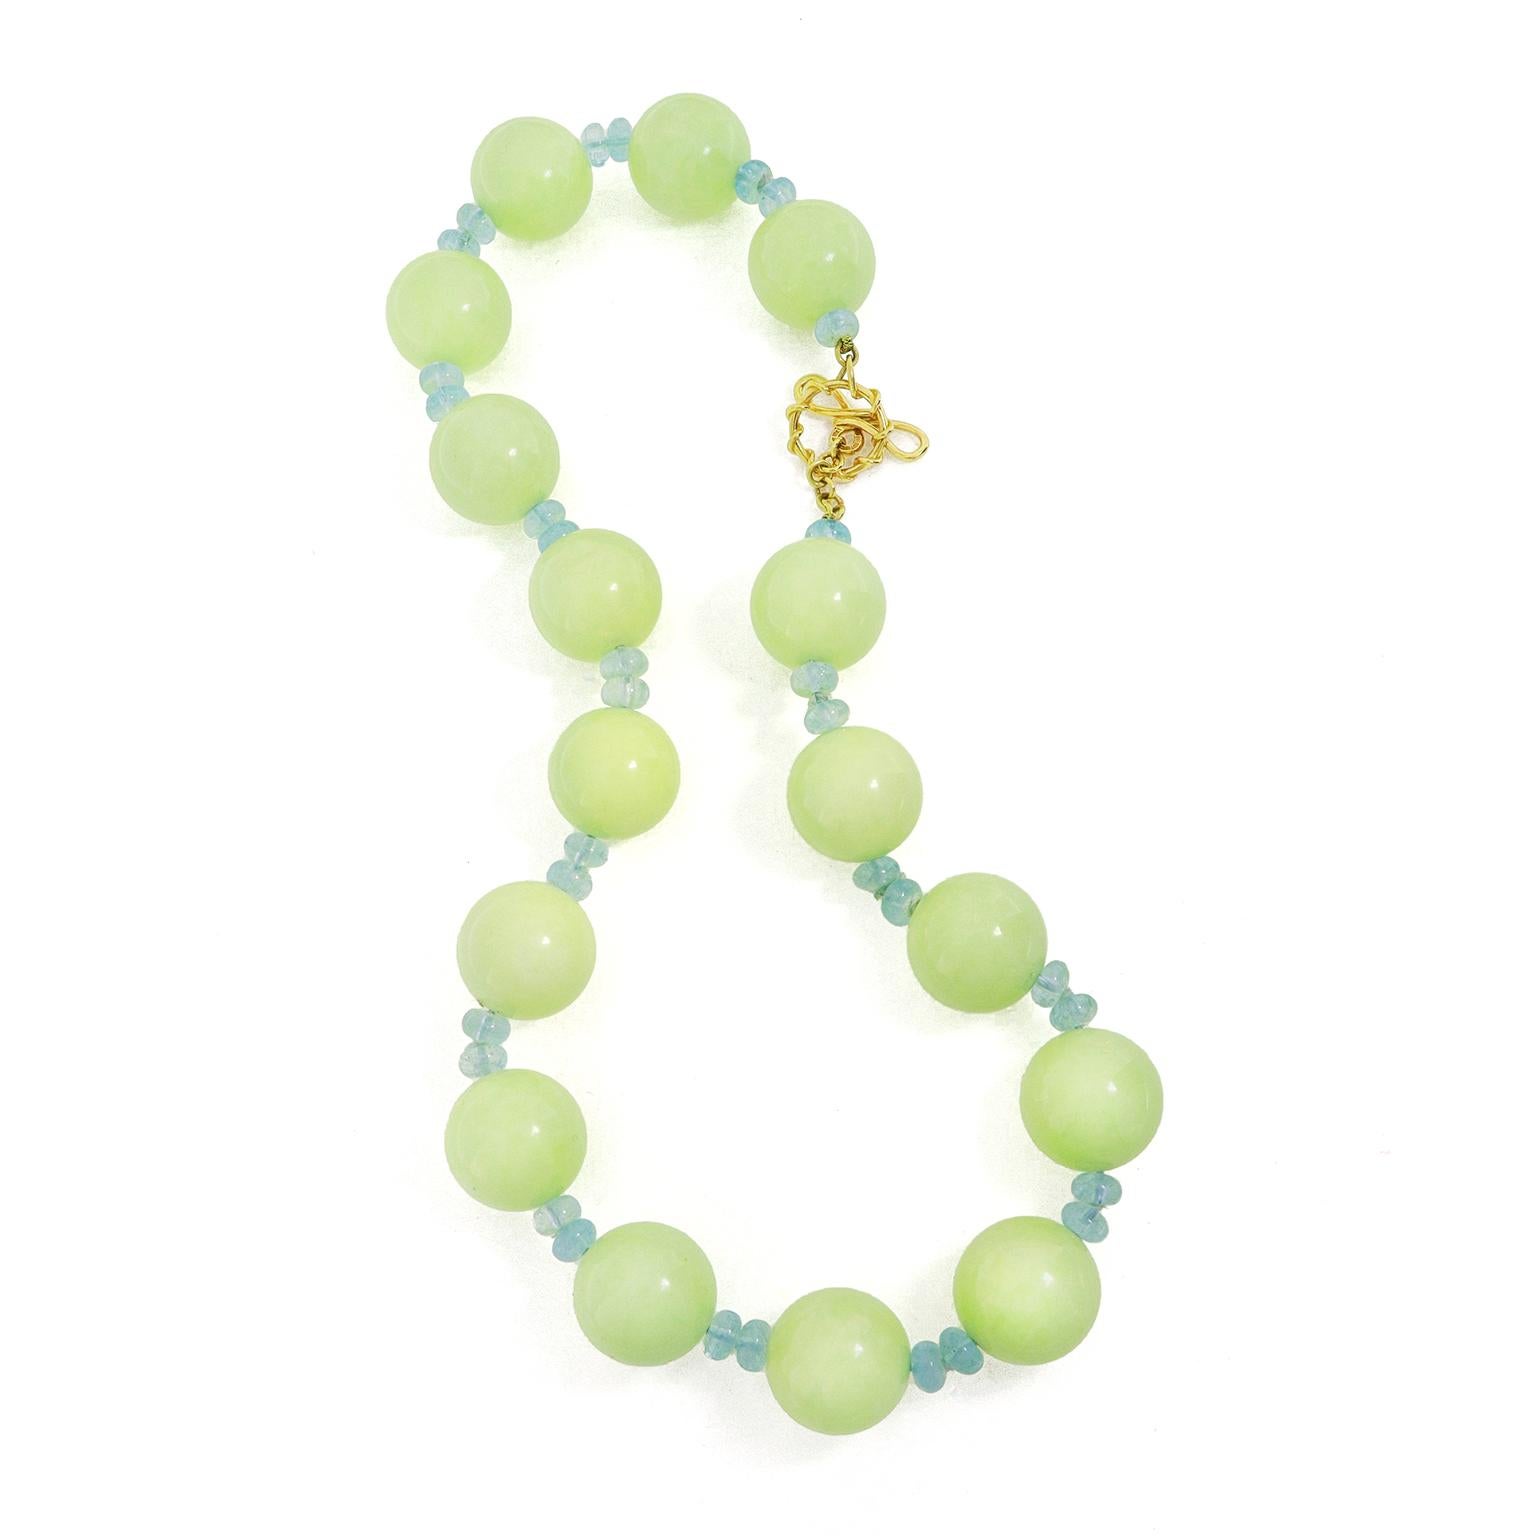 Cool toned gemstones orbit in this necklace. Chrysoprase in the variation of a soft sea foam green is the highlight. In between each globe of the chalcedony are two aquamarine roundels for a complementary accent. The total weights are 22 carats of